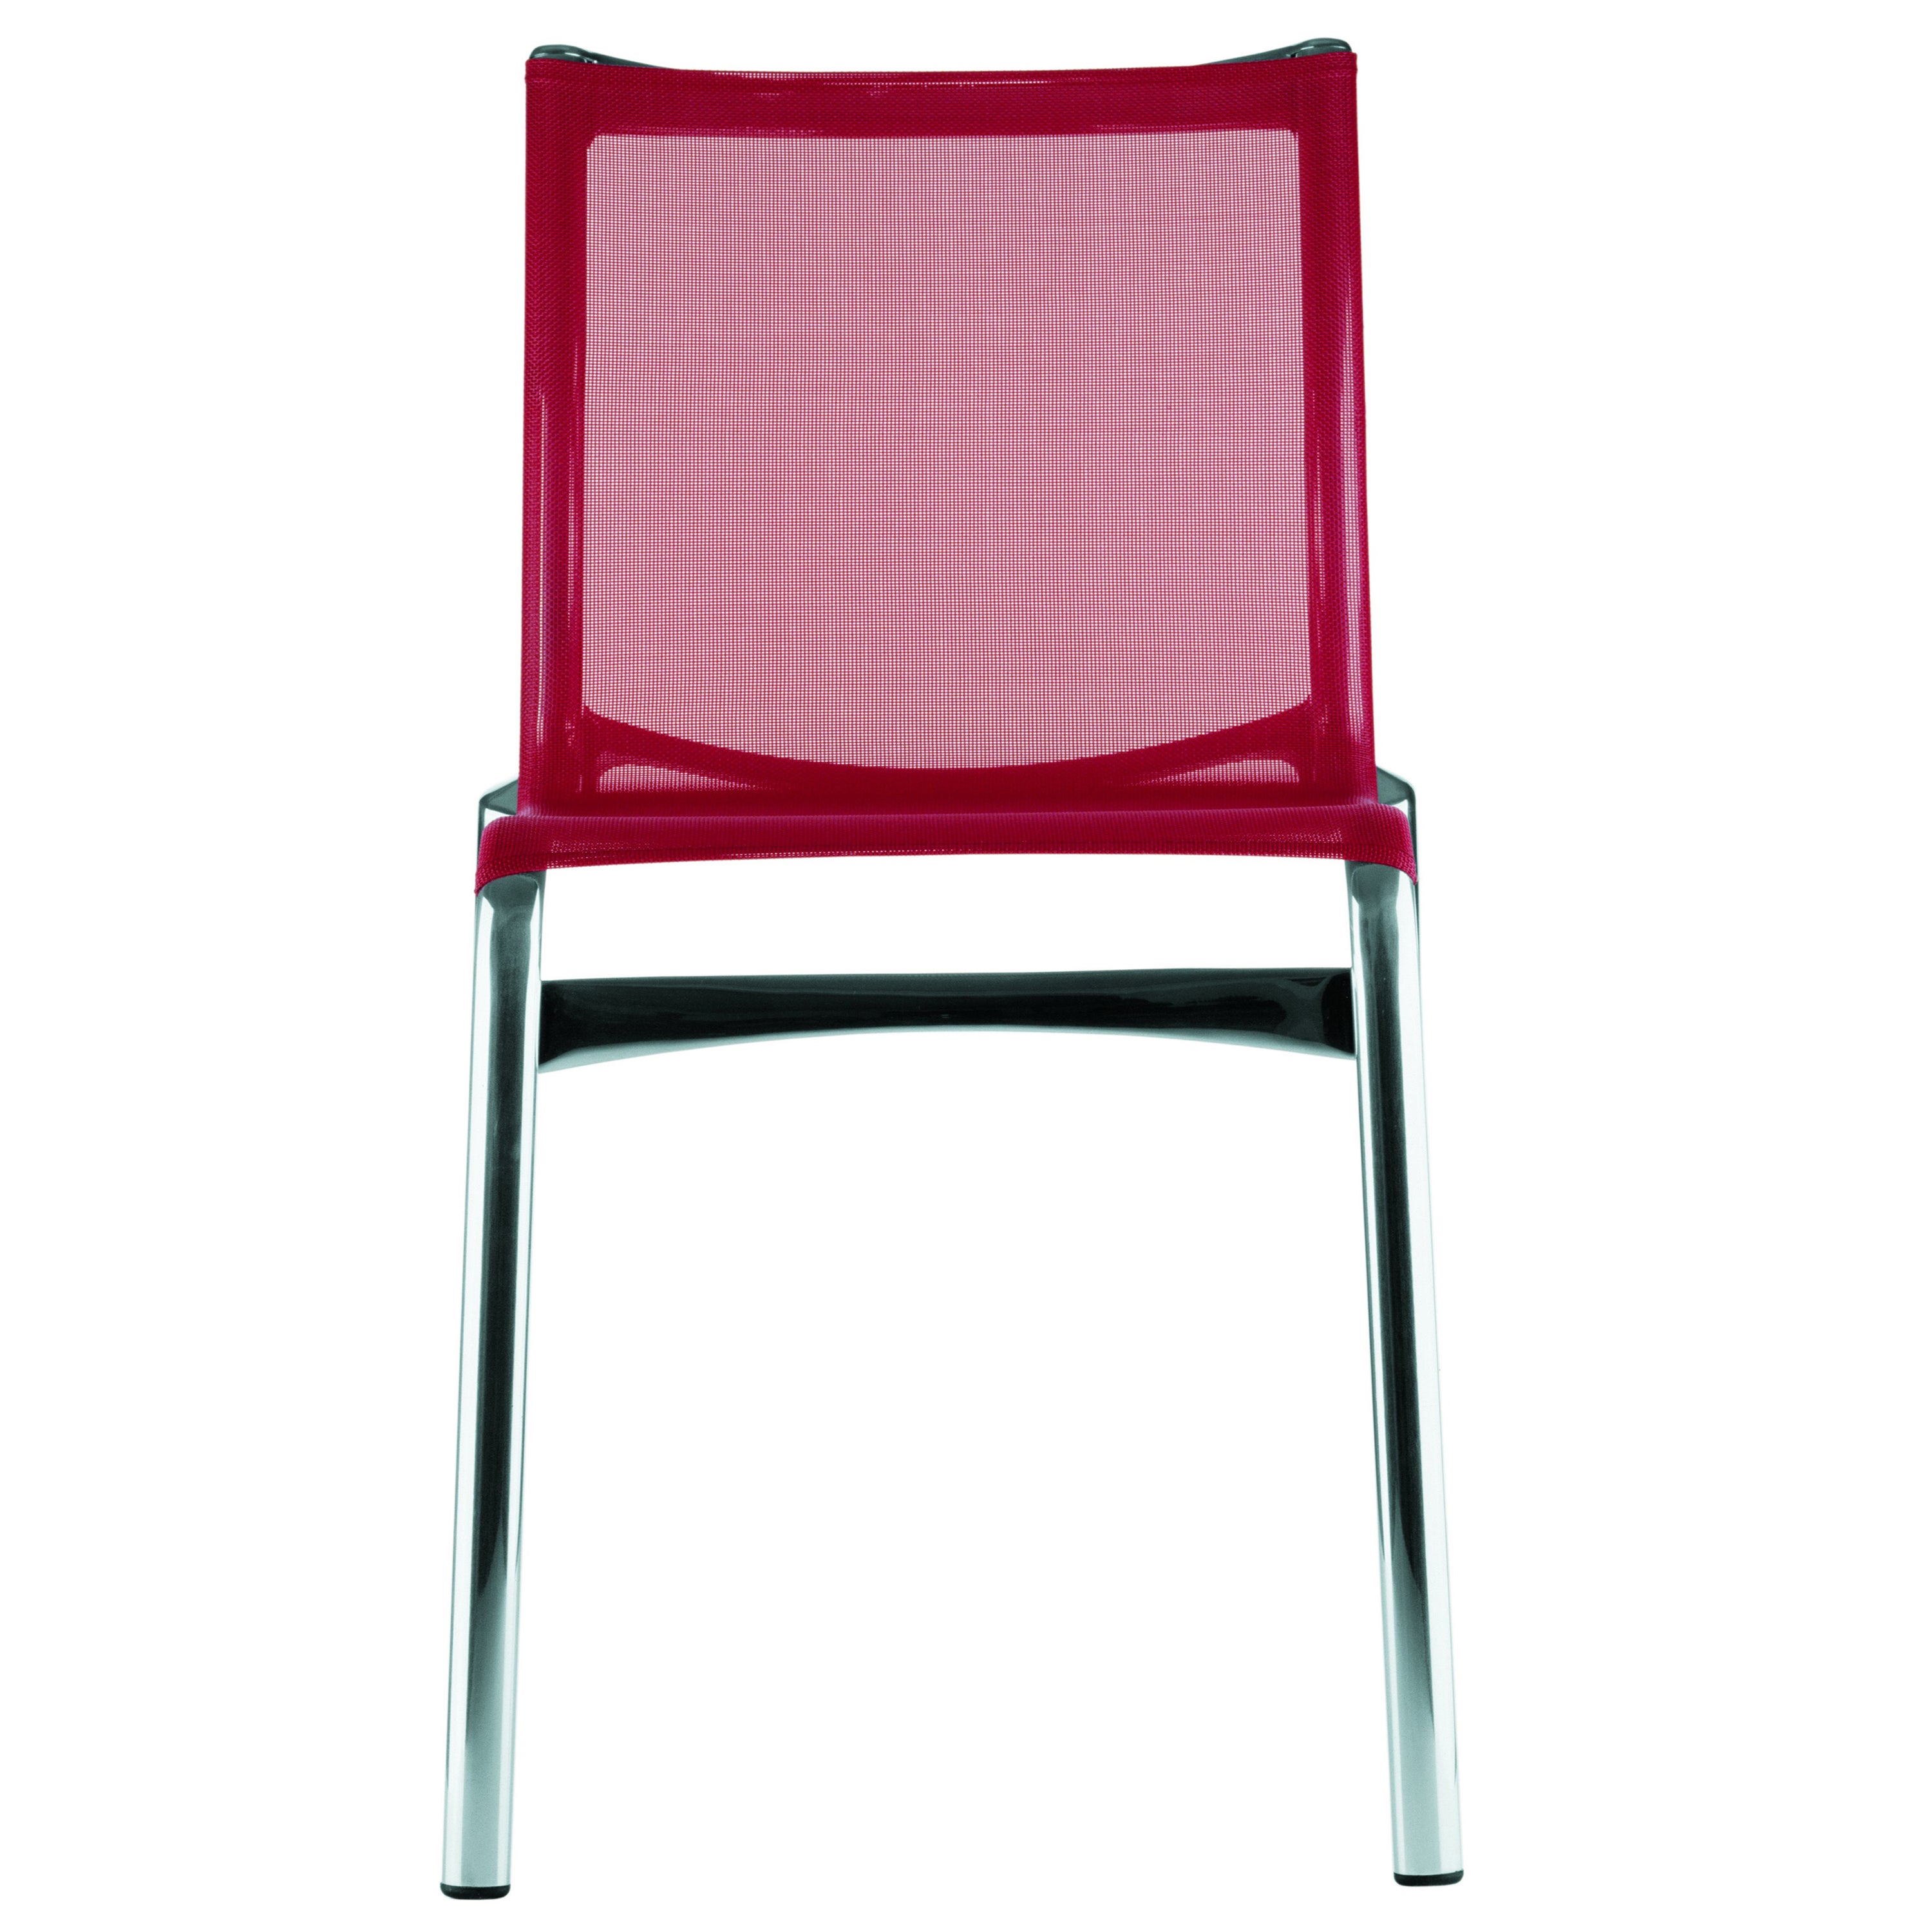 Alias Bigframe 44 Chair in Red Mesh with Chromed Aluminium Frame by Alberto Meda For Sale